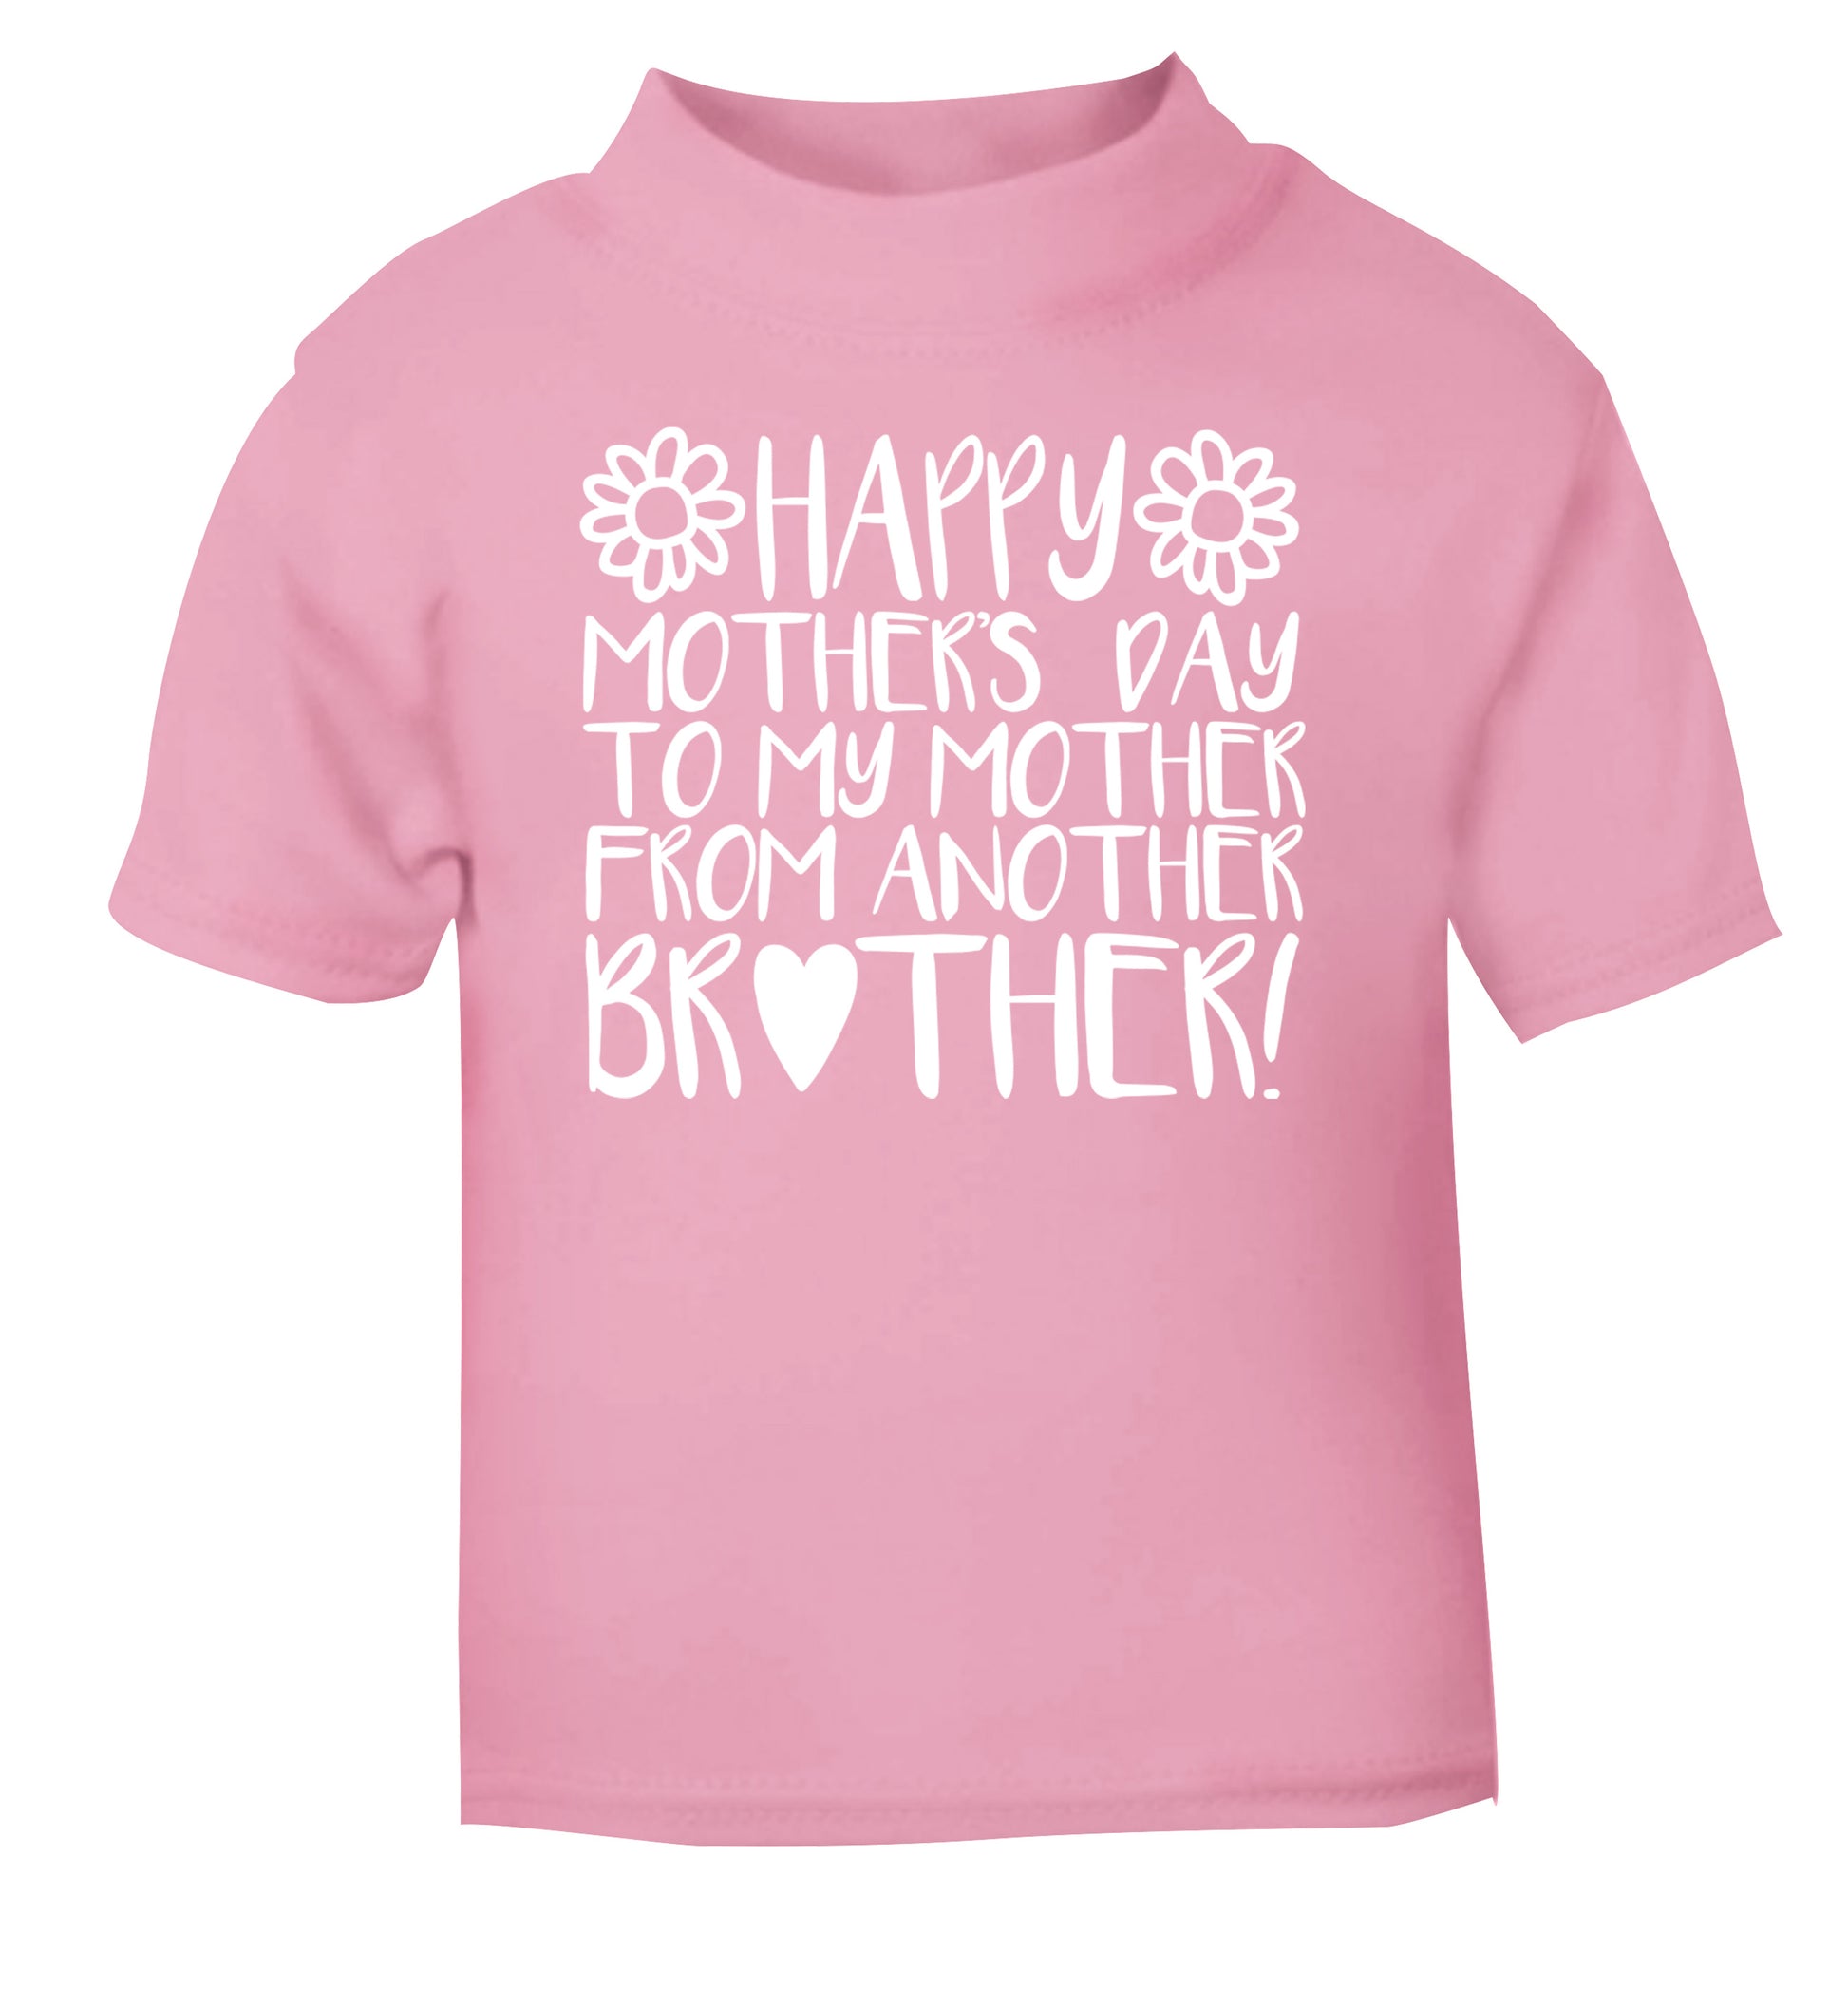 Happy mother's day to my mother from another brother light pink Baby Toddler Tshirt 2 Years